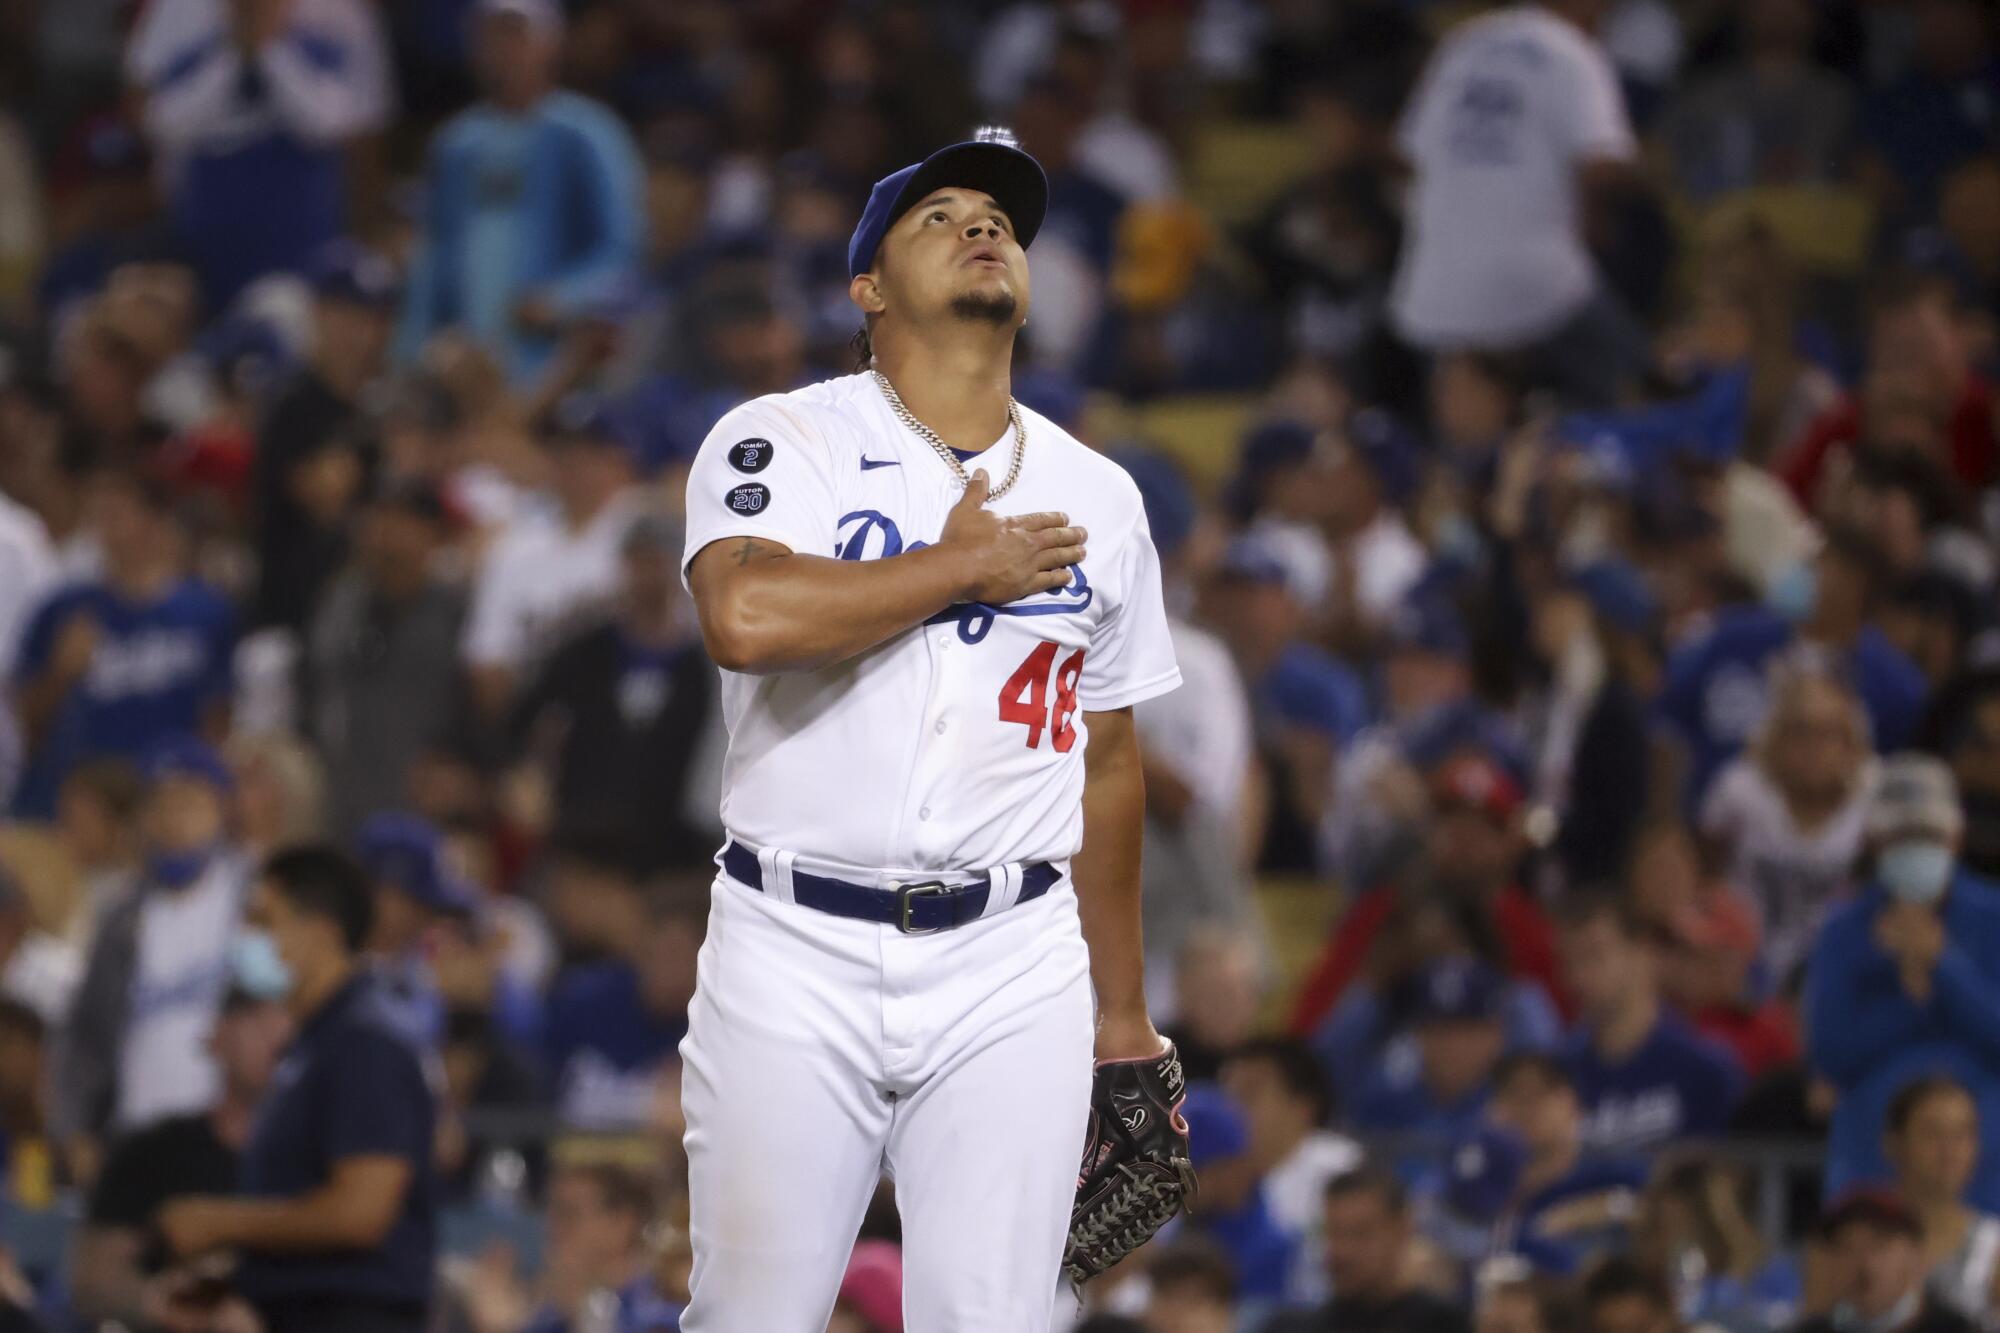 Los Angeles Dodgers relief pitcher Brusdar Graterol celebrates after the last out of the sixth inning